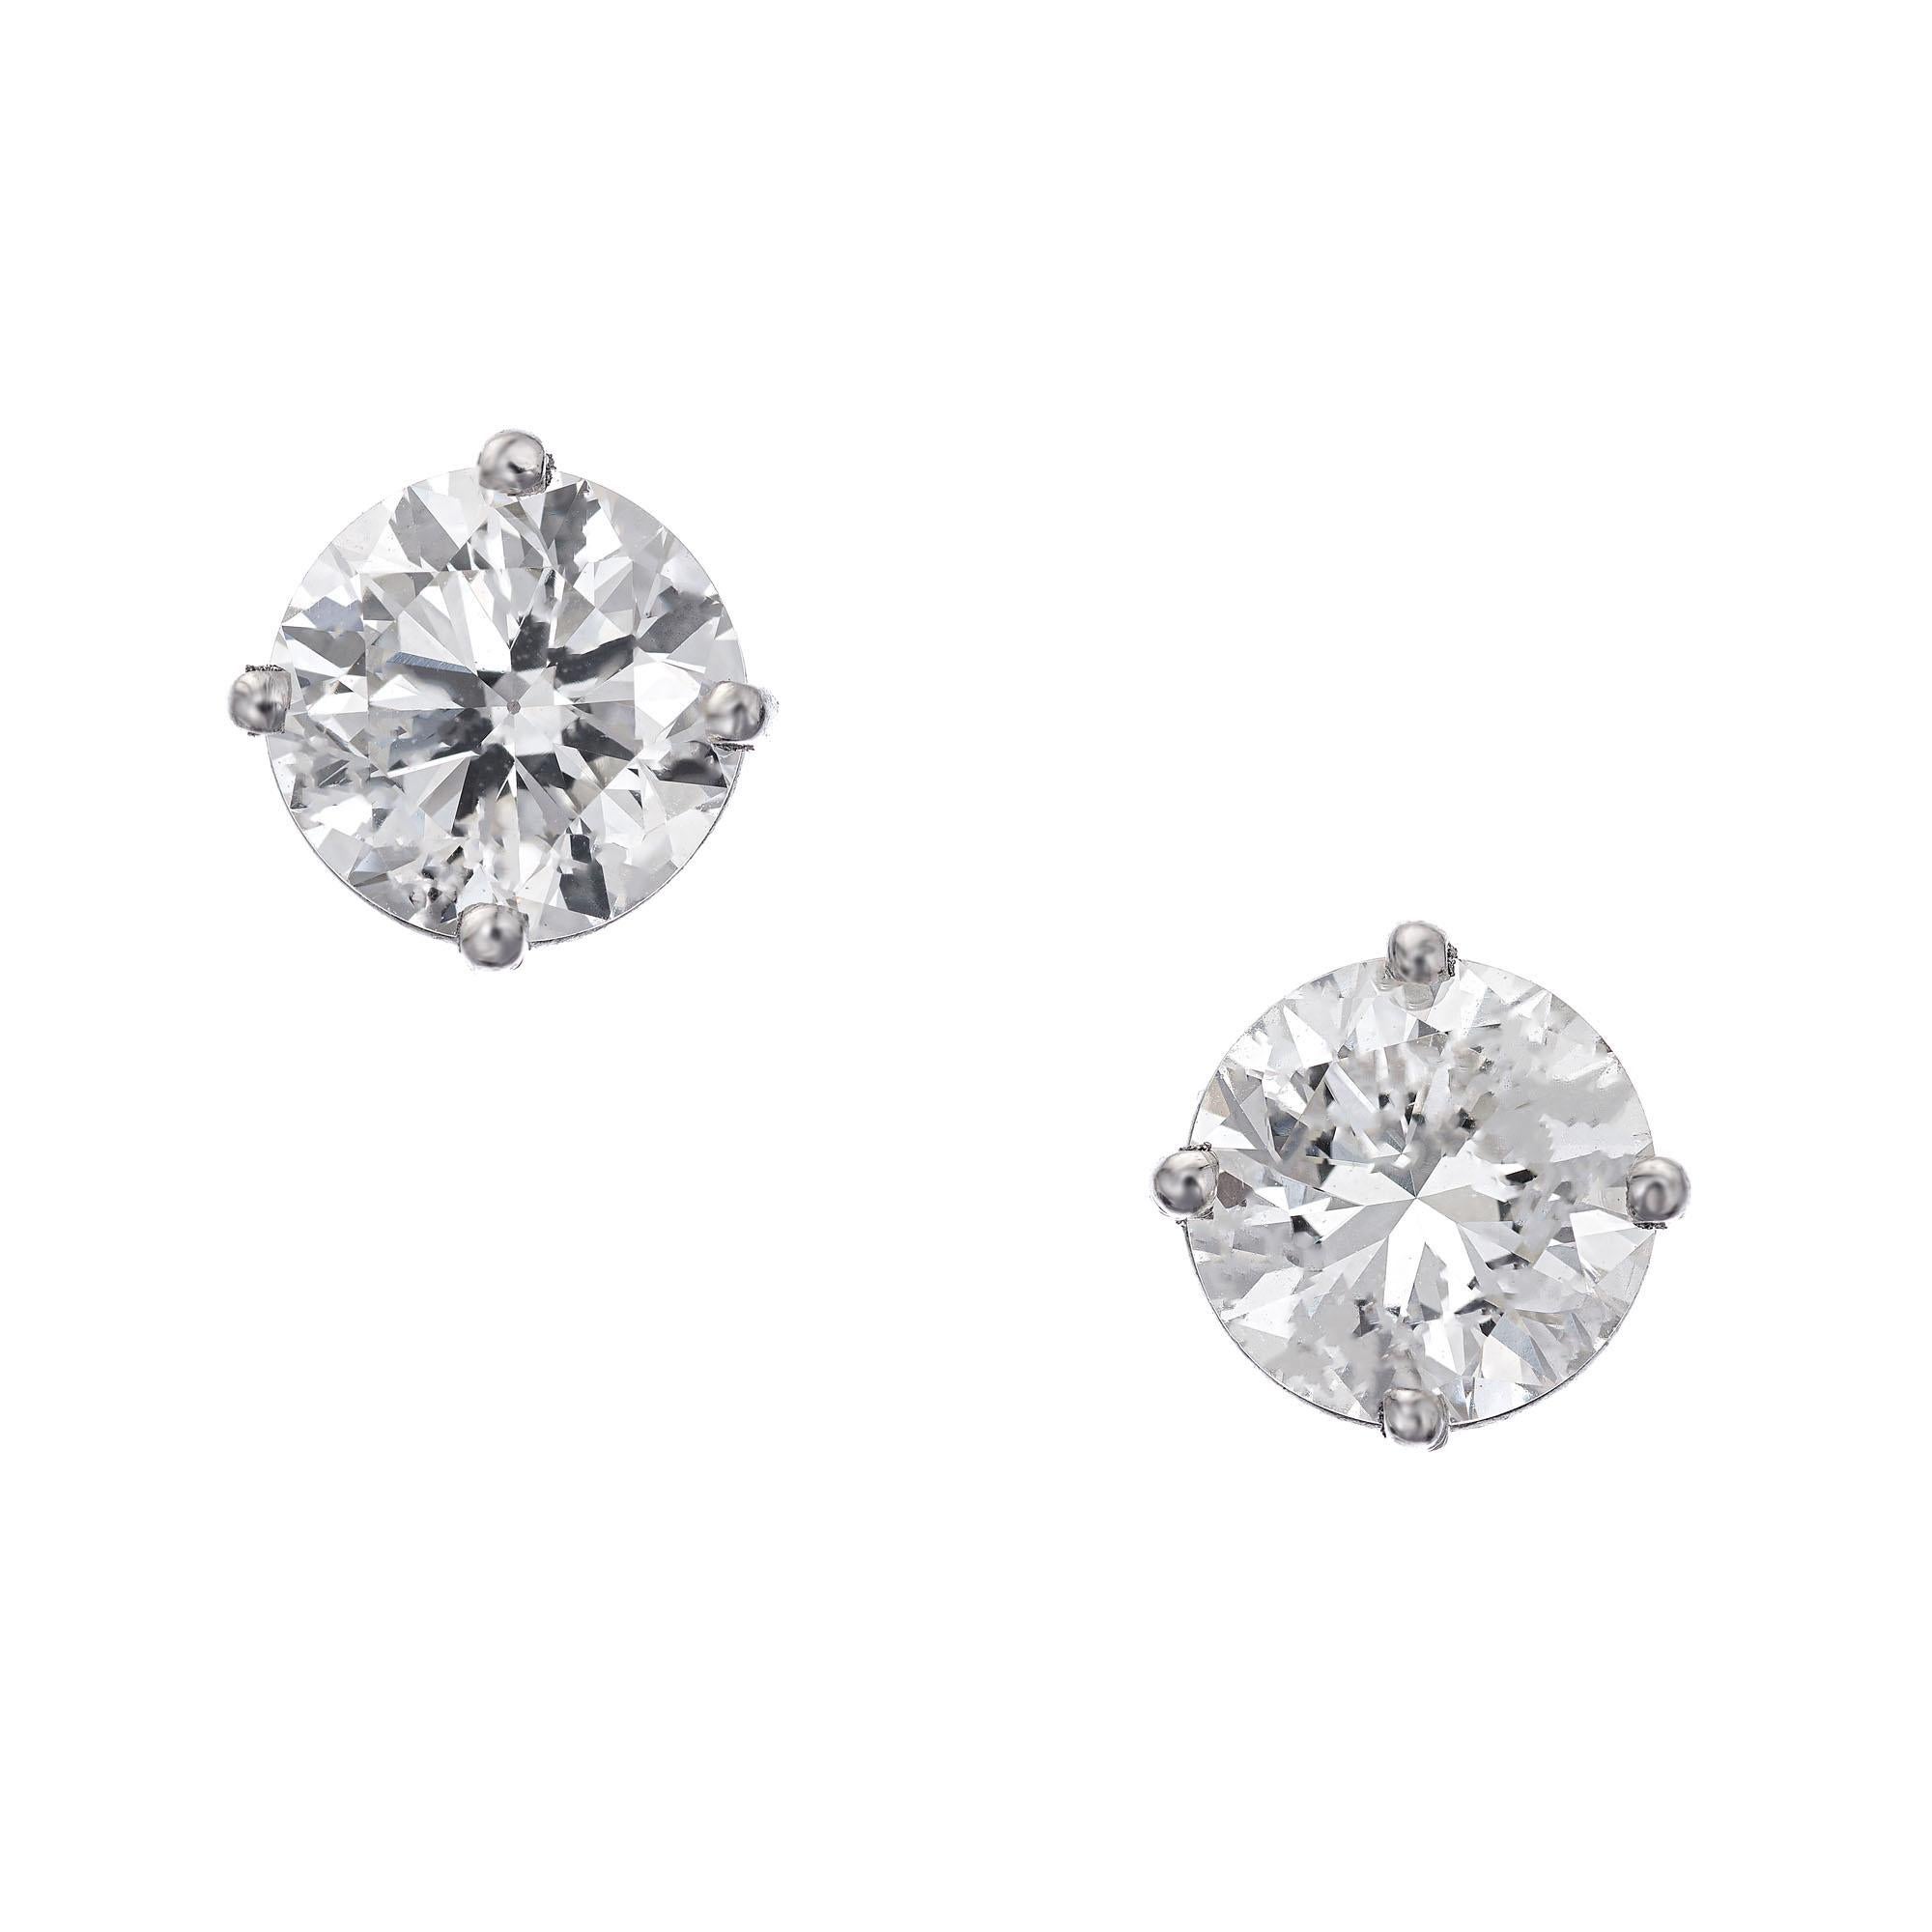 Peter Suchy diamond stud earrings. 2 GIA certified round brilliant cut diamonds in 4 prong platinum baskets created in the Peter Suchy Workshop. 

1 round brilliant cut K VS2 diamond, Approximate .91 Carats Gia Certificate # 2175424288
1 round